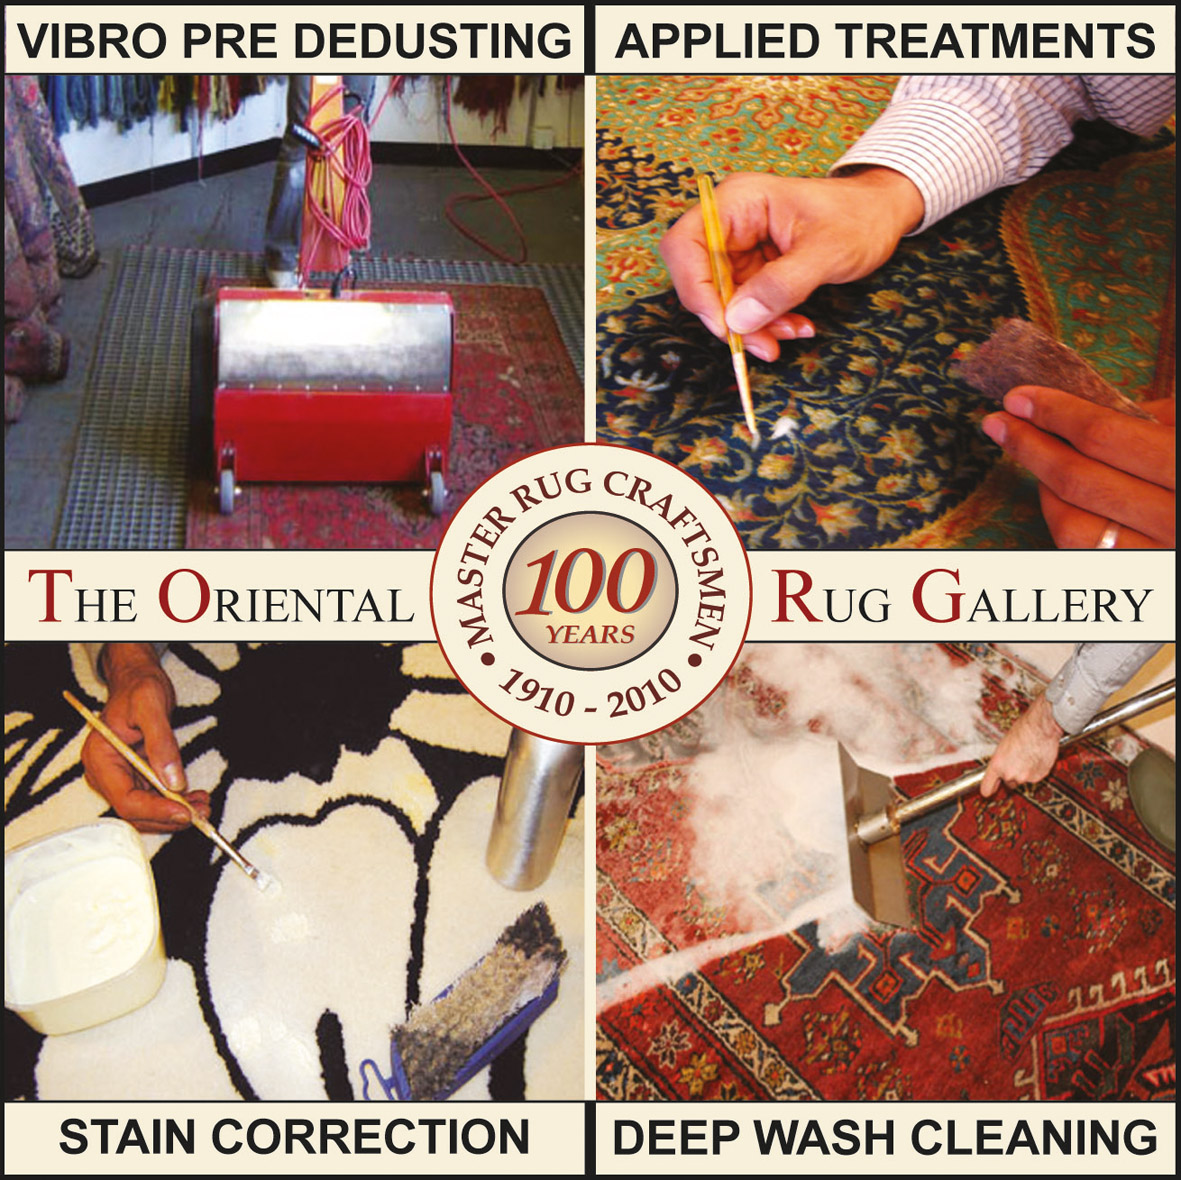 Deep-Wash Rug Cleaning & Stain Corrective Services at The Oriental Rug Gallery Ltd.jpg